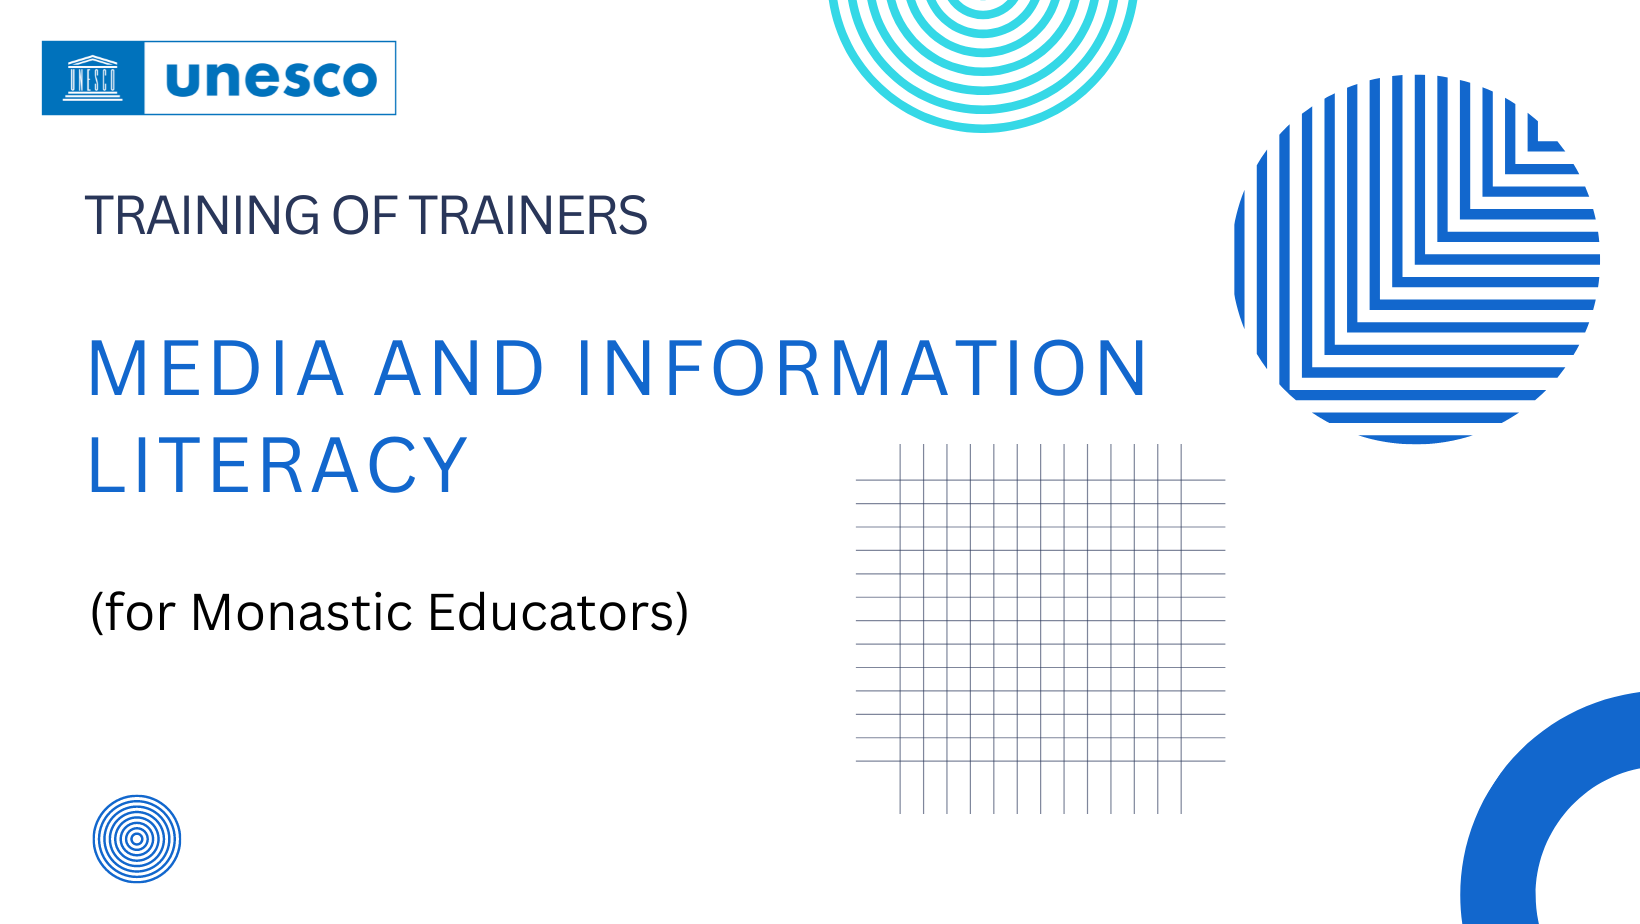 Training of Trainers on Media and Information Literacy (for Monastic Educators)